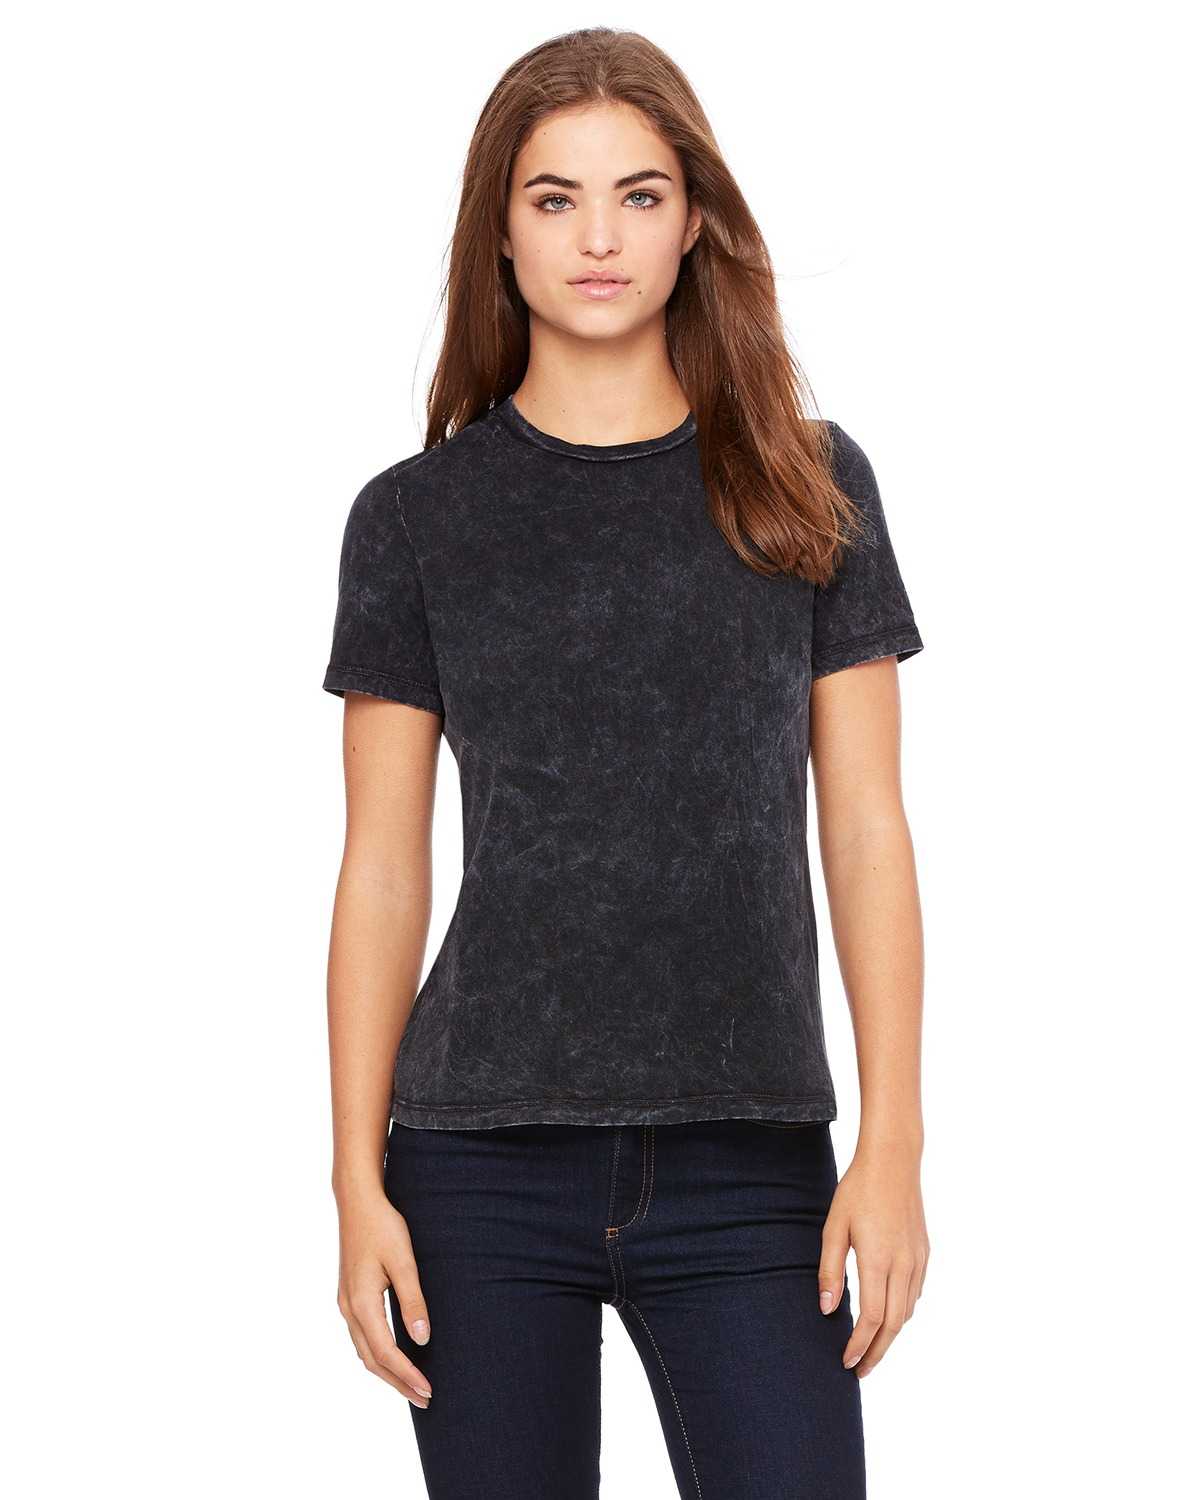 Bella + Canvas B6400 Ladies' Relaxed Jersey Short-Sleeve T-Shirt ...